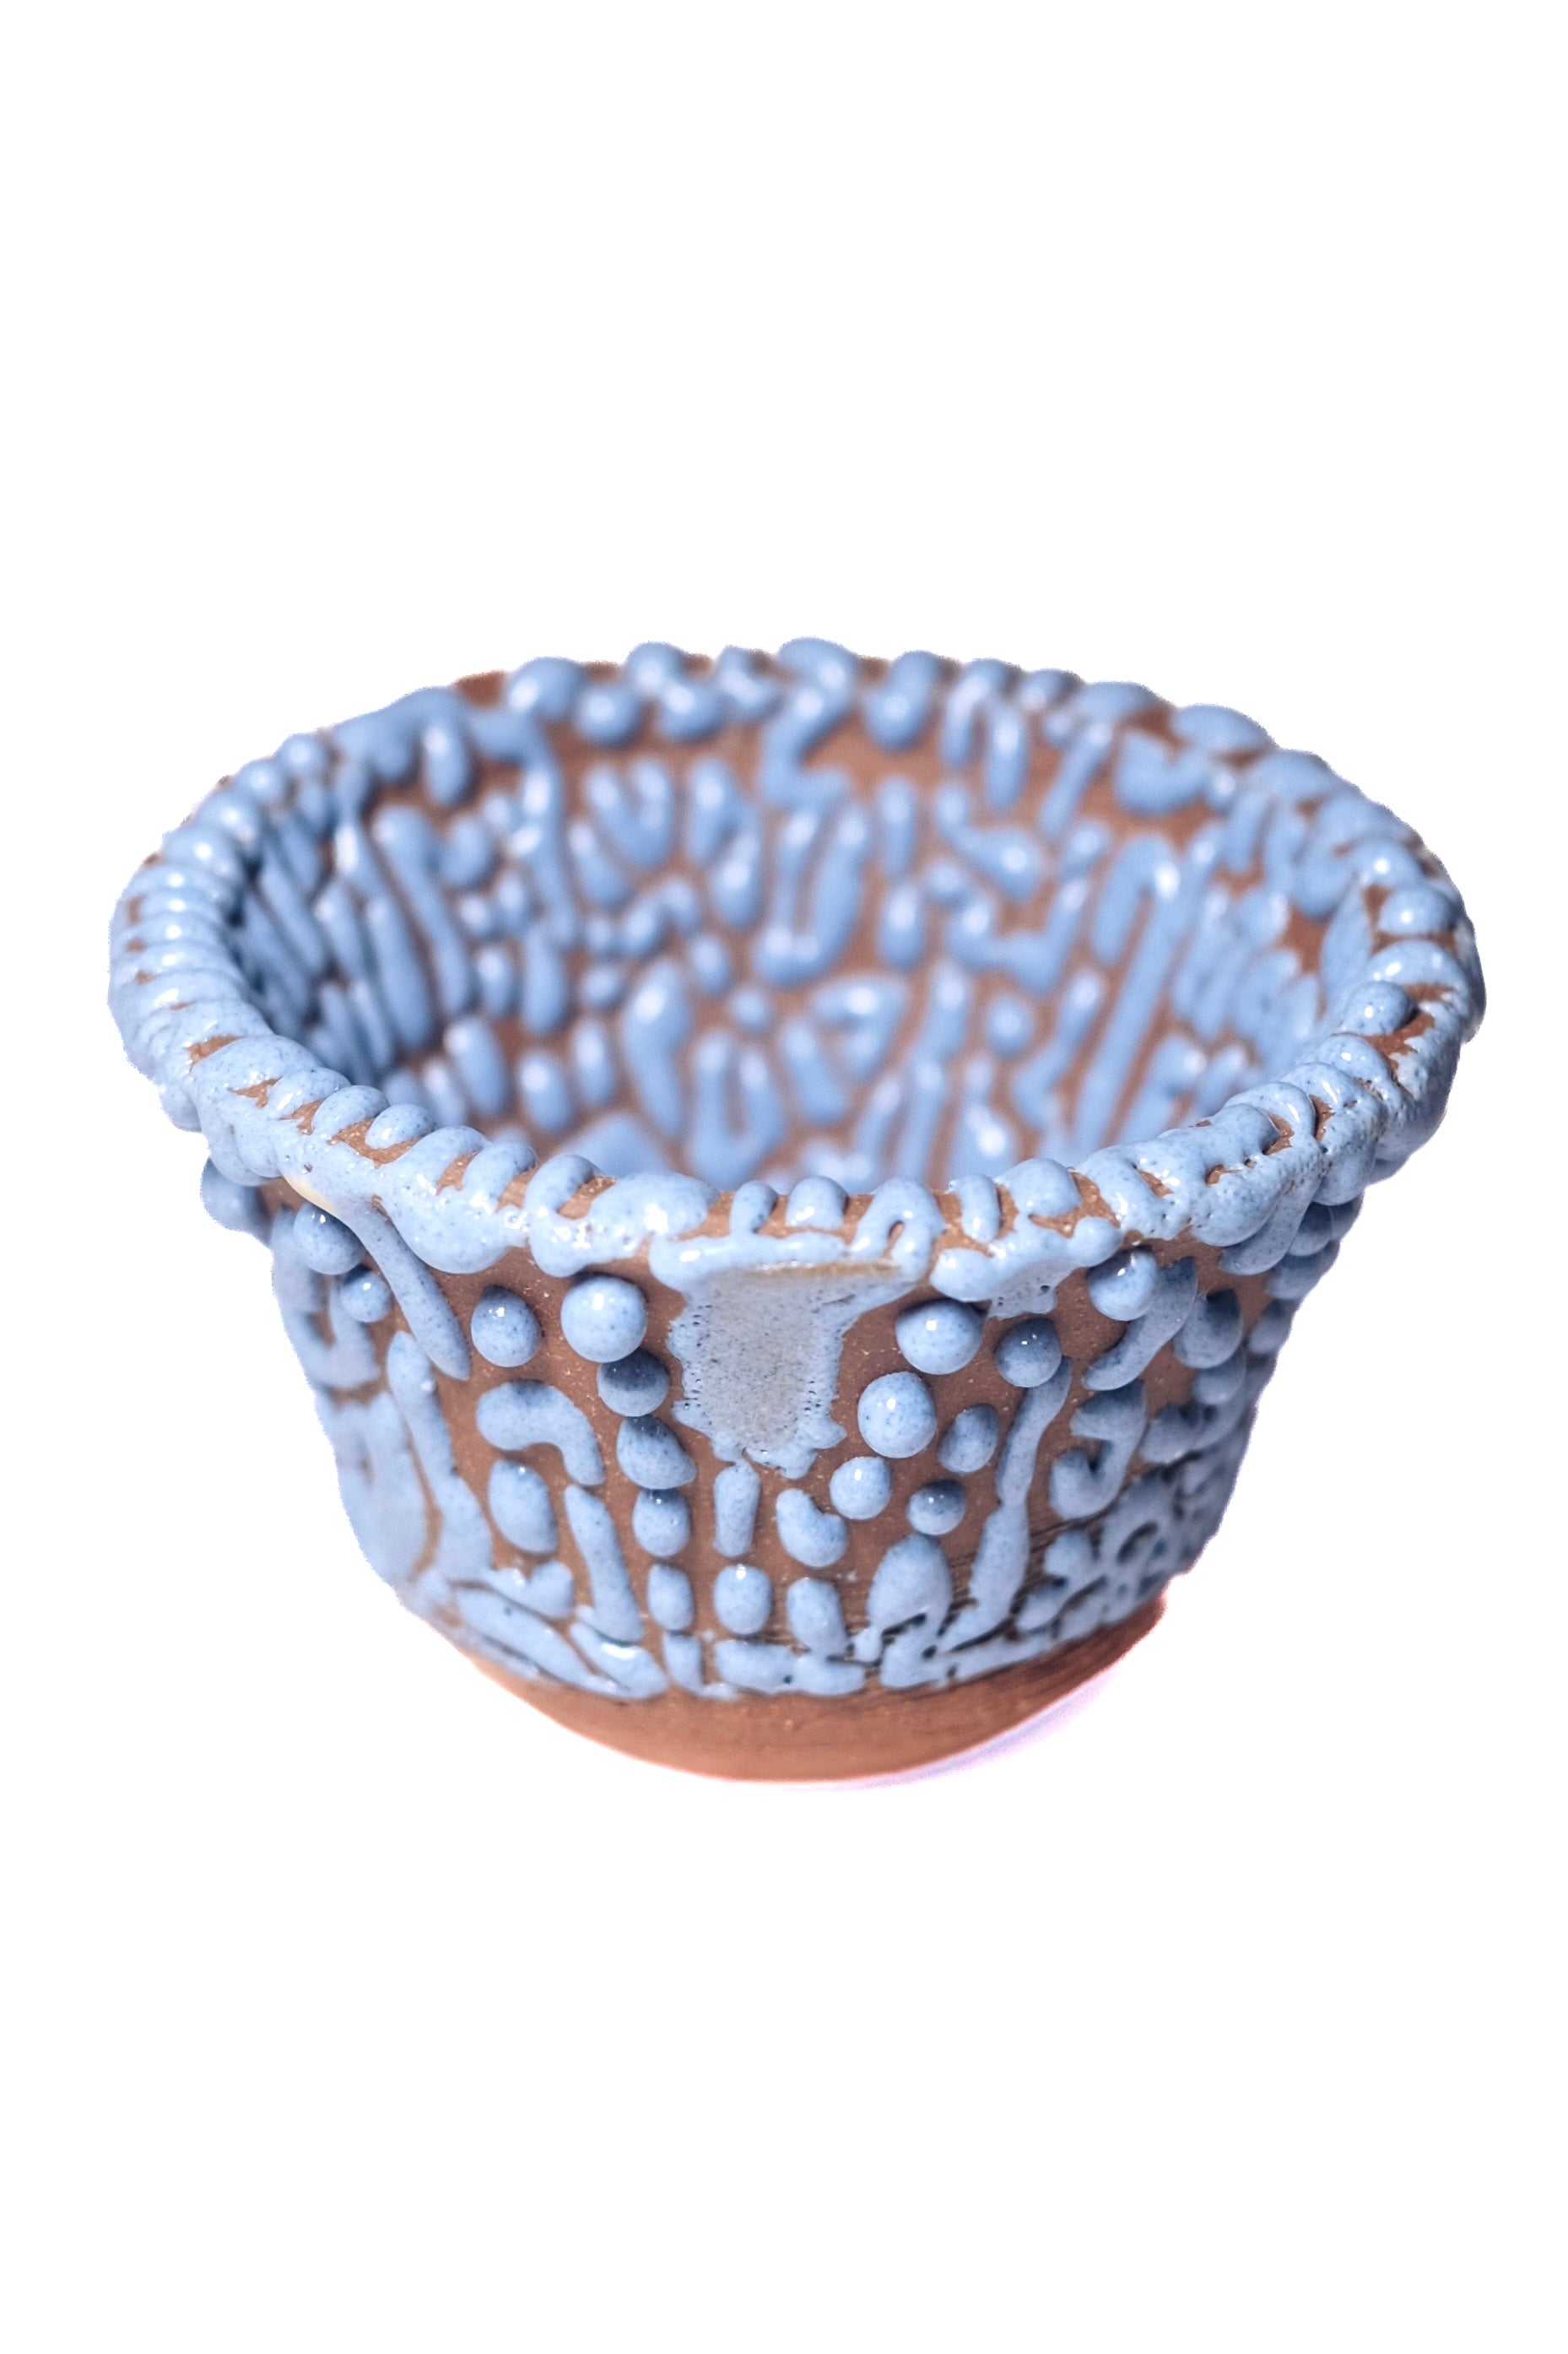 Fired bowl with blue bead glaze on dark clay. Gloop-like texture when fired to cone 5 or 6.